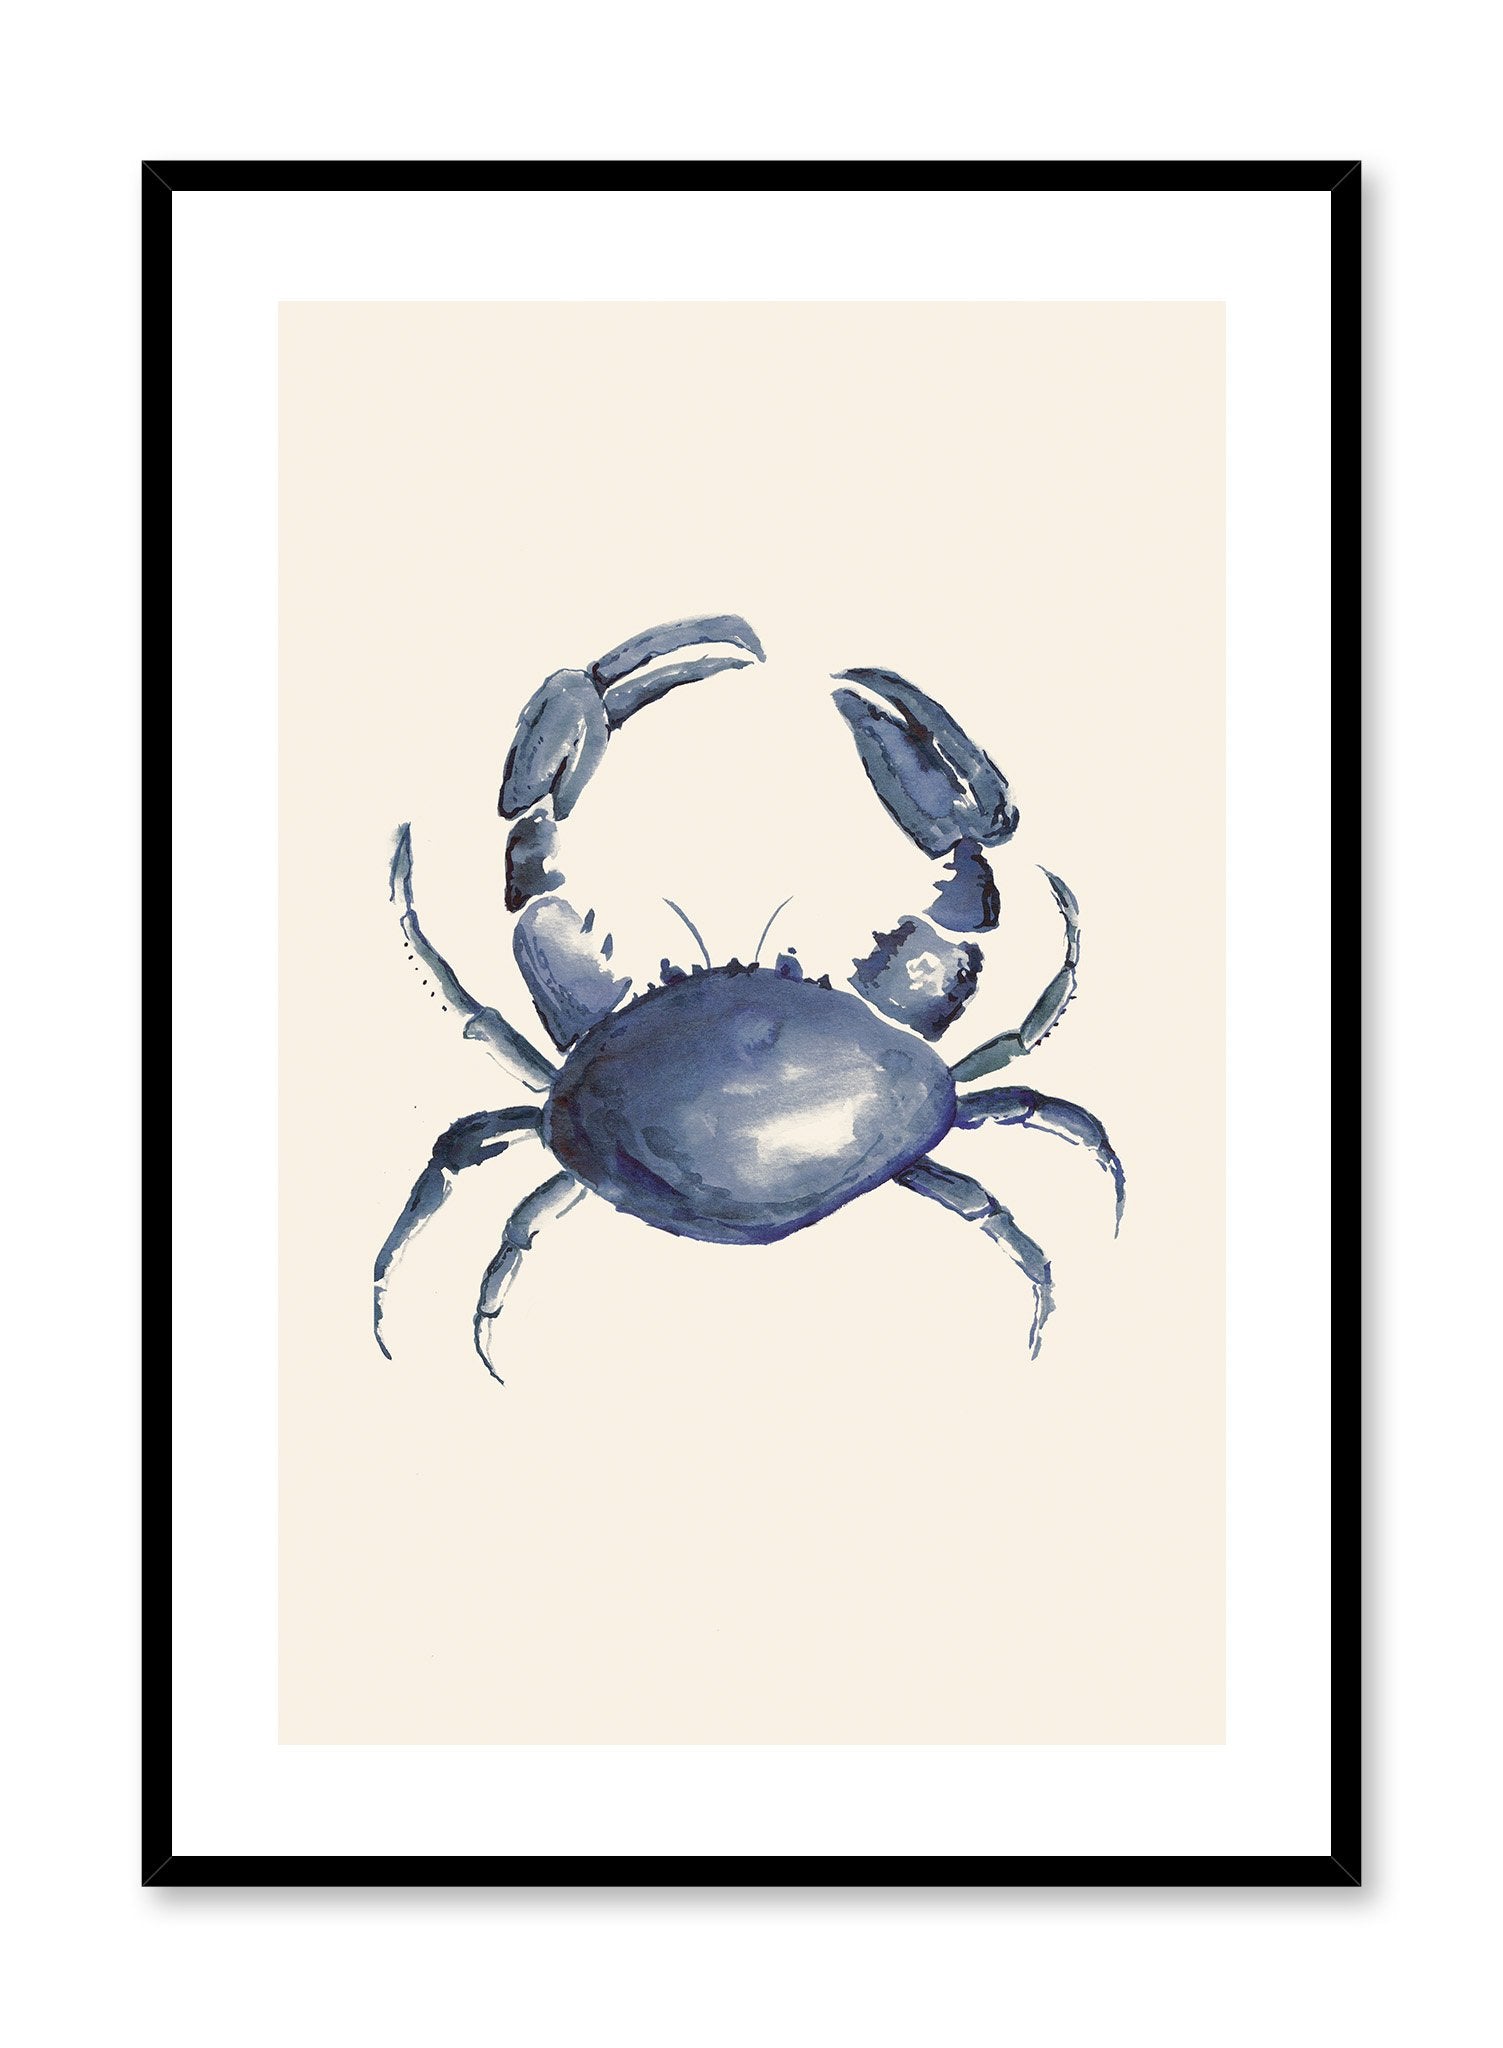 Crabby is a minimalist illustration of a grey-shelled crab showing its mighty claws by Opposite Wall.